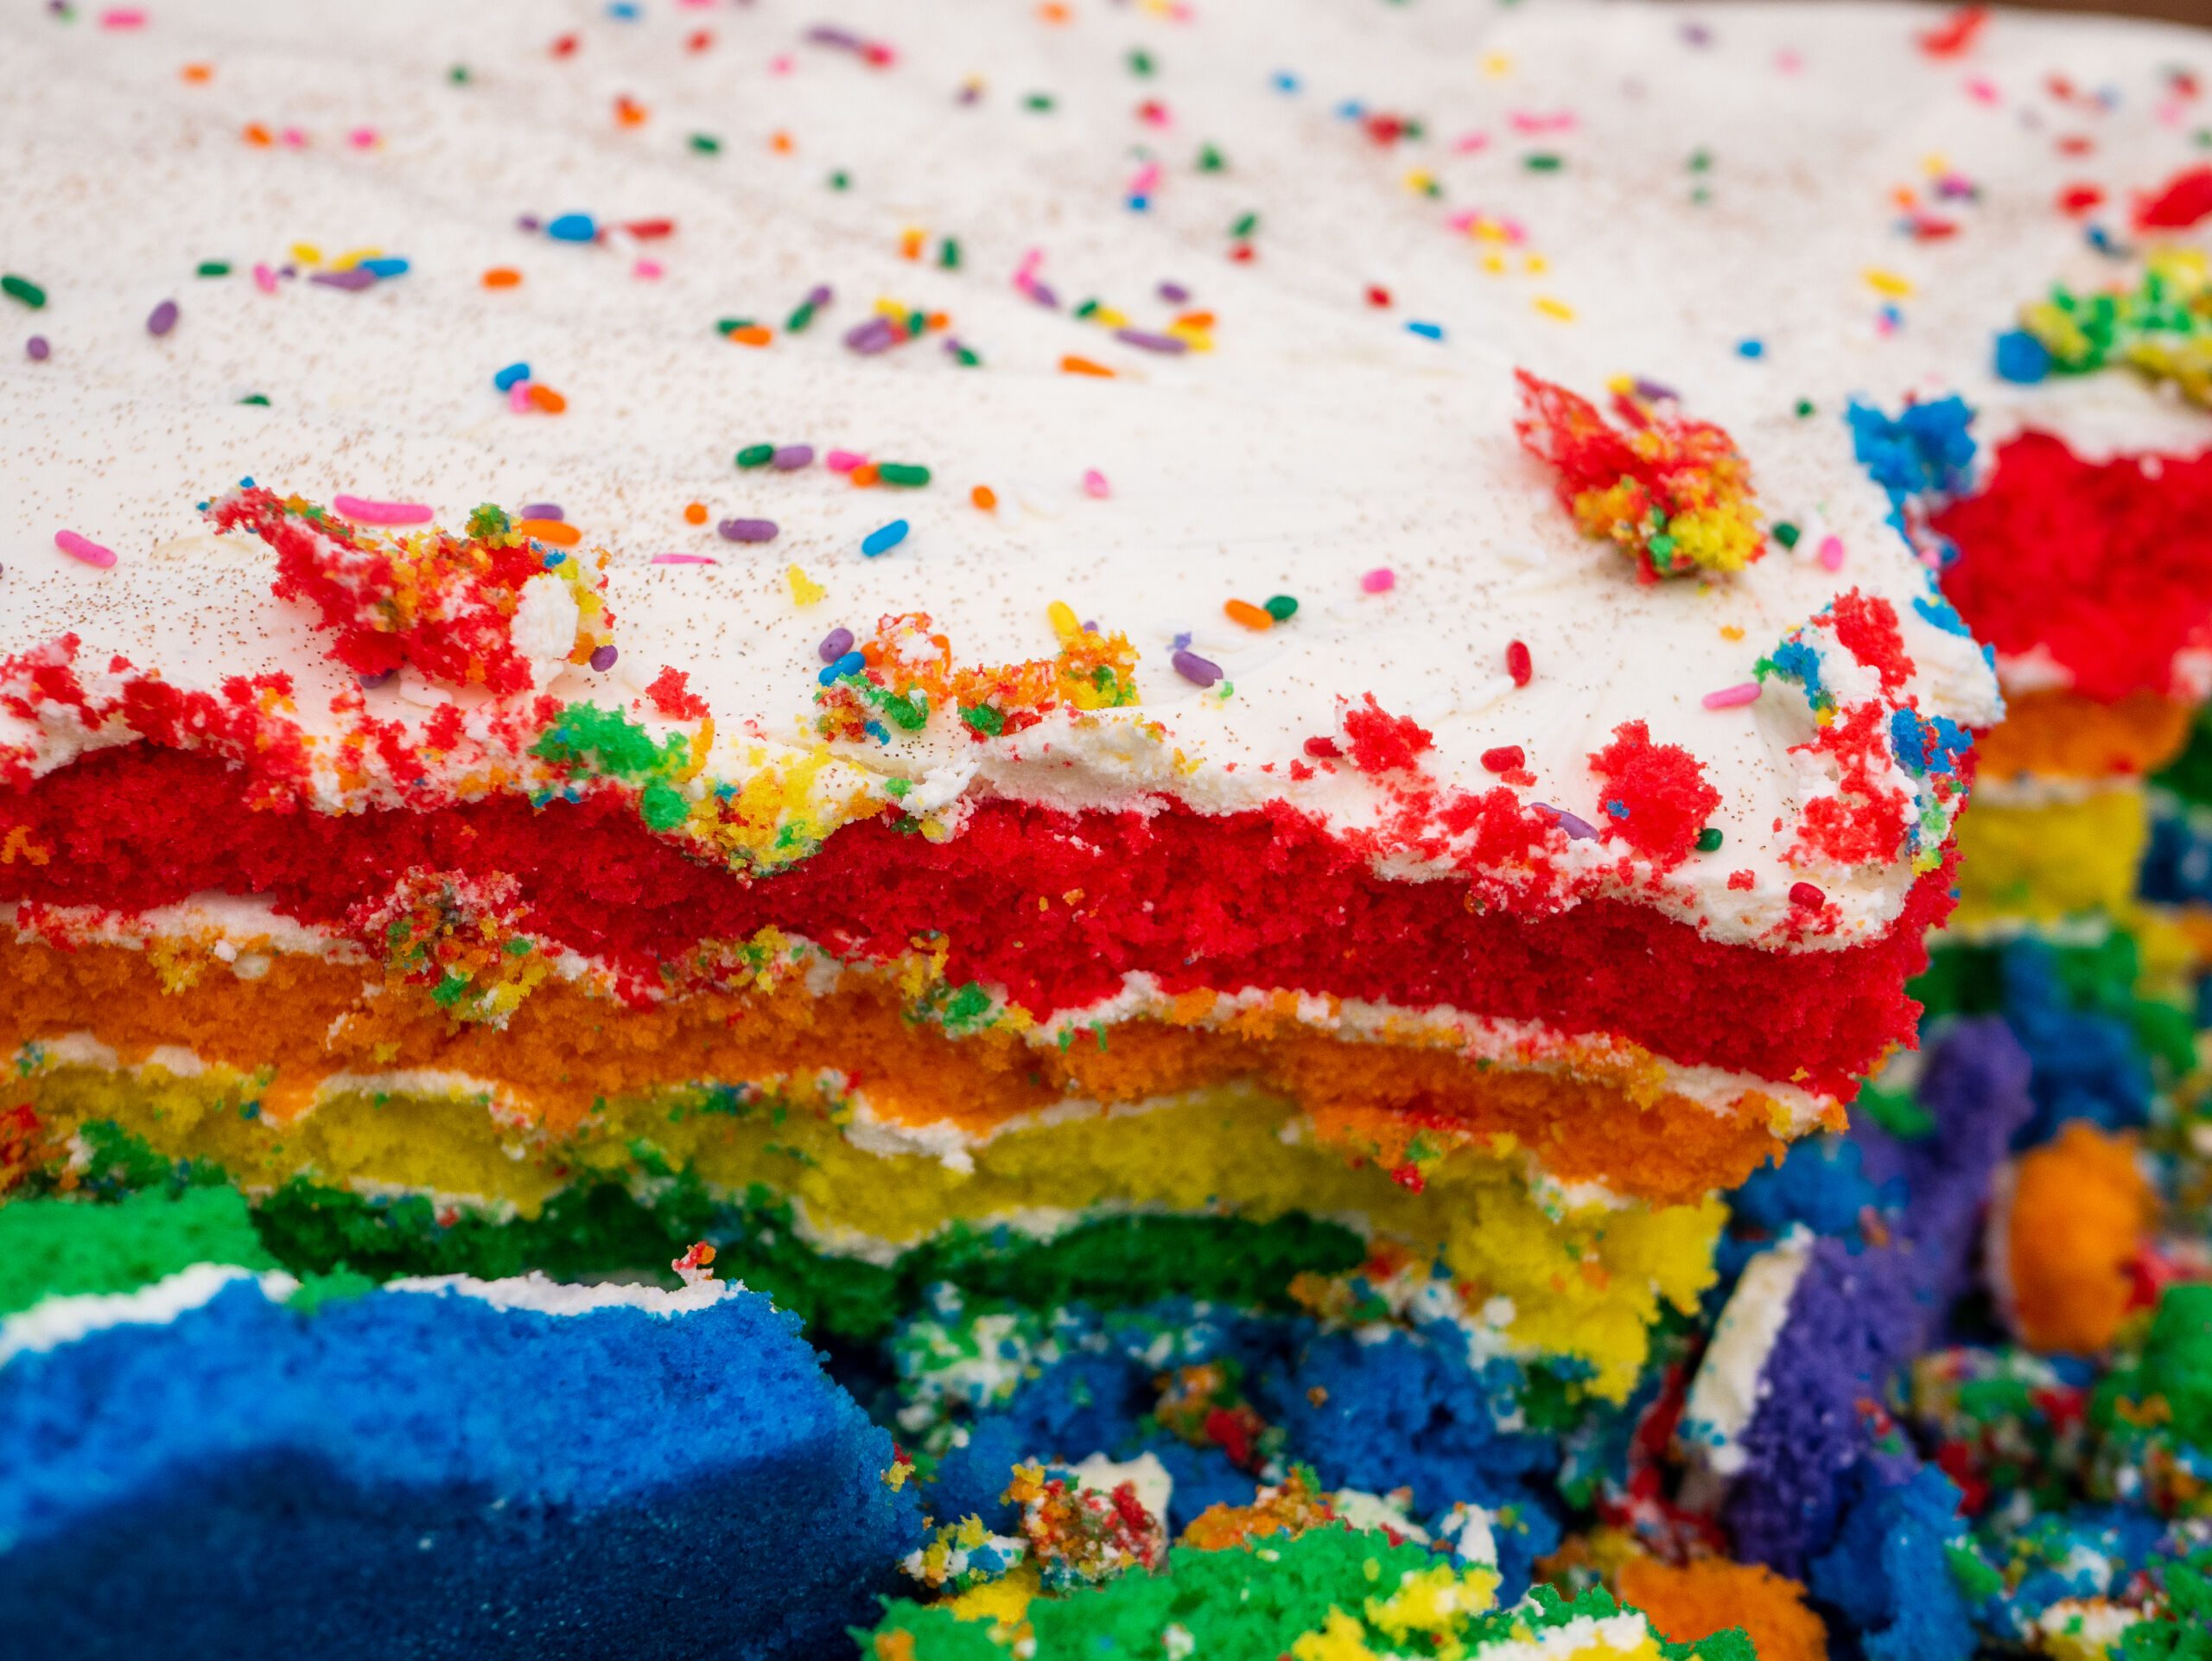 Photo of a rainbow cake. The cake has red, orange, yellow, green, blue, and purple coloring inside the cake. The top of the cake has white icing with rainbow sprinkles.